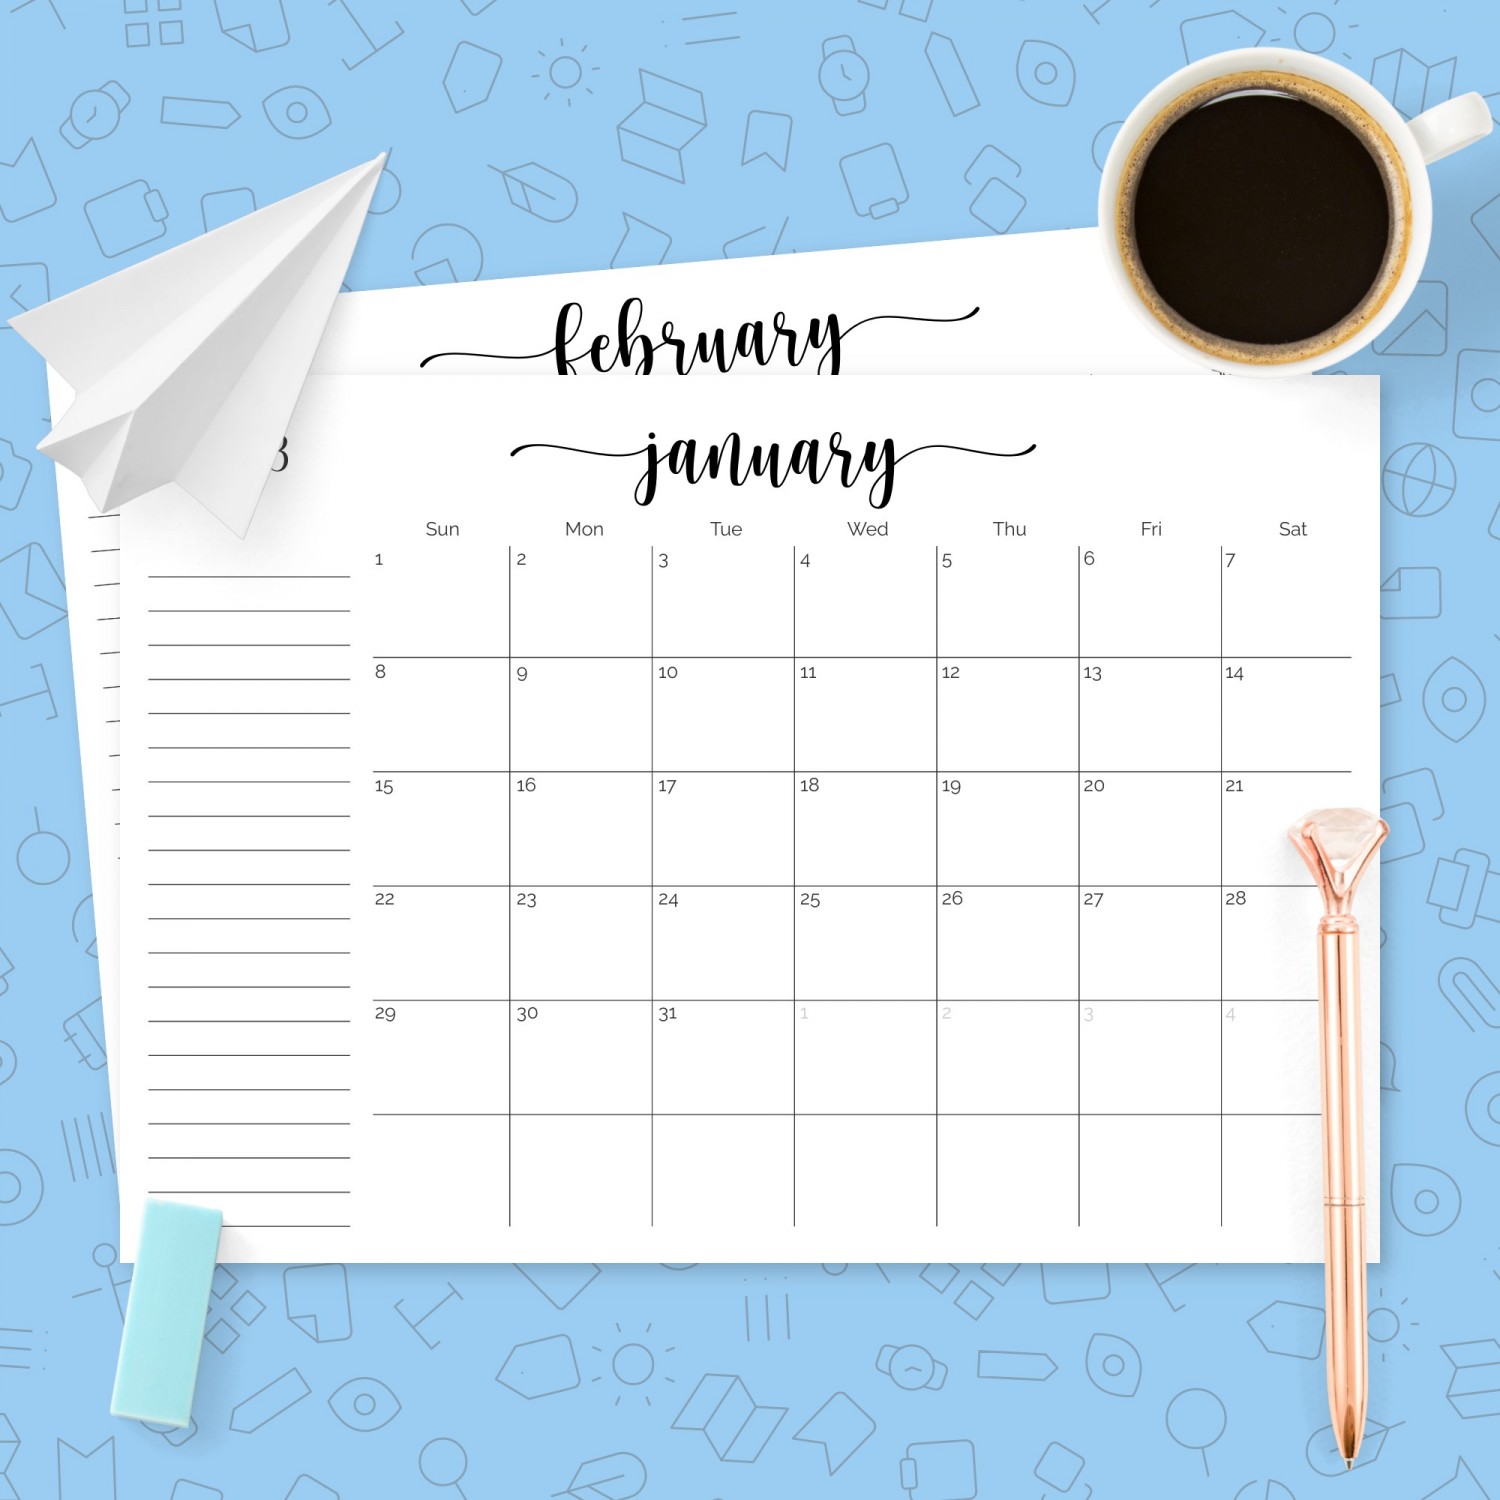 calendar template with notes section 14